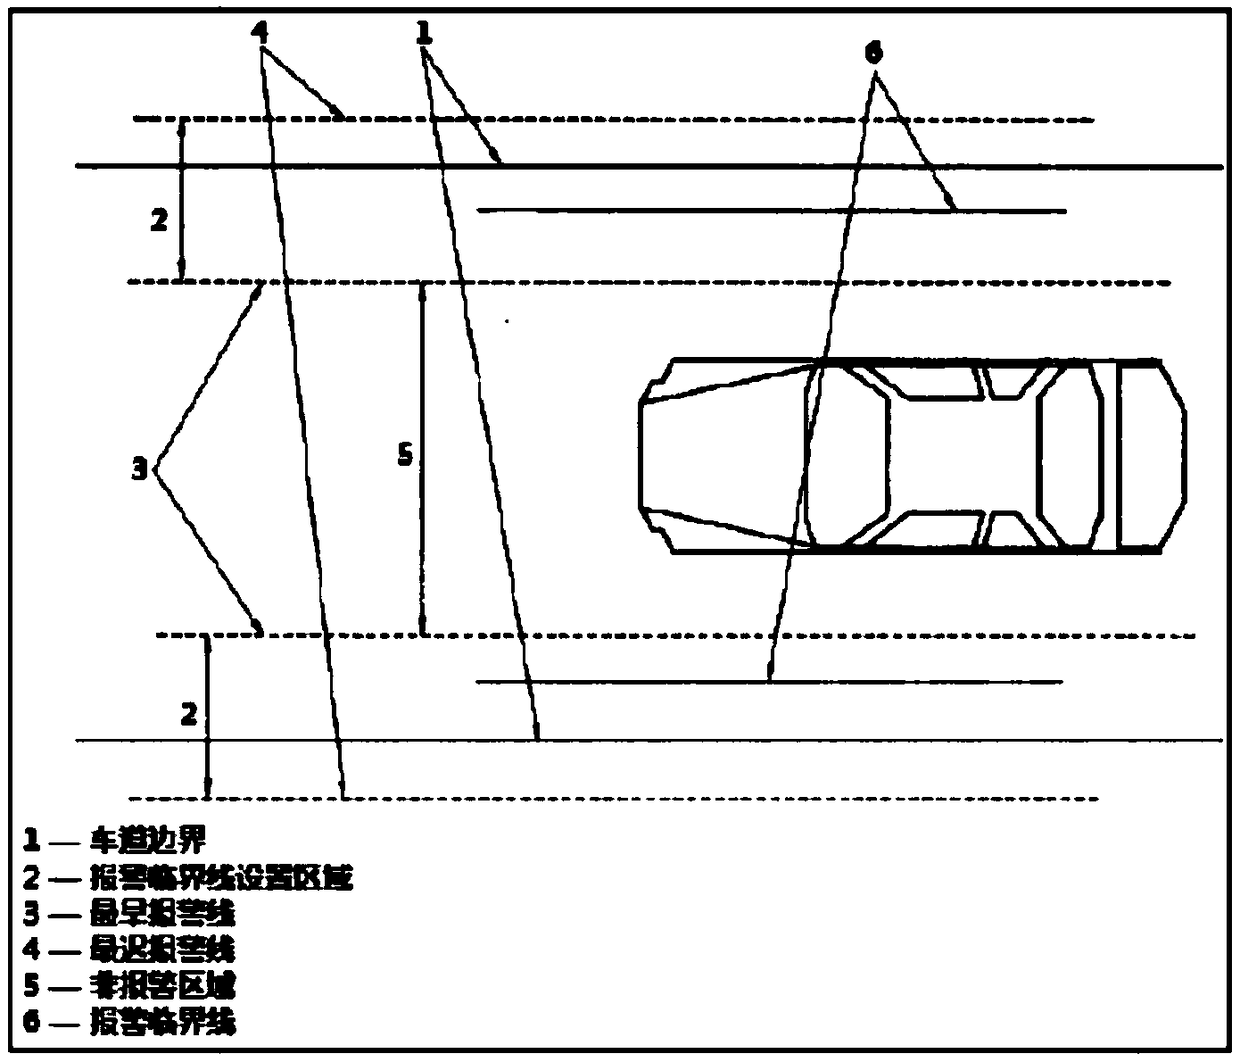 Lane shift early warning control method based on a 360-degree circumferential view image system